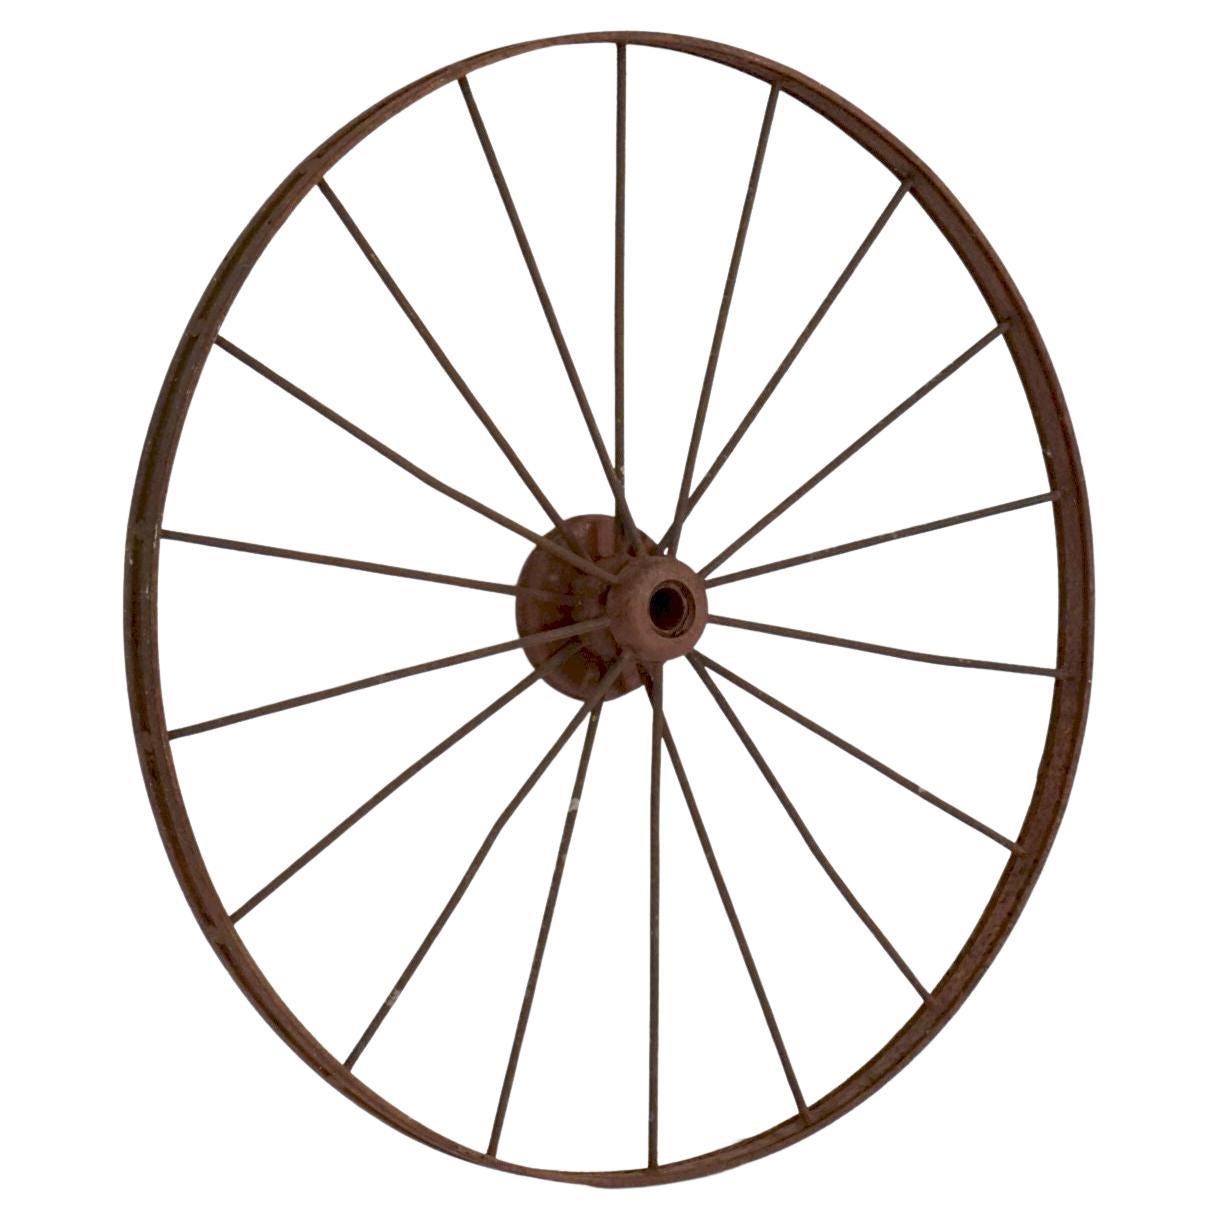 Large English Spoked Cart or Wagon Wheel of Iron from the 19th Century (Dia 54)